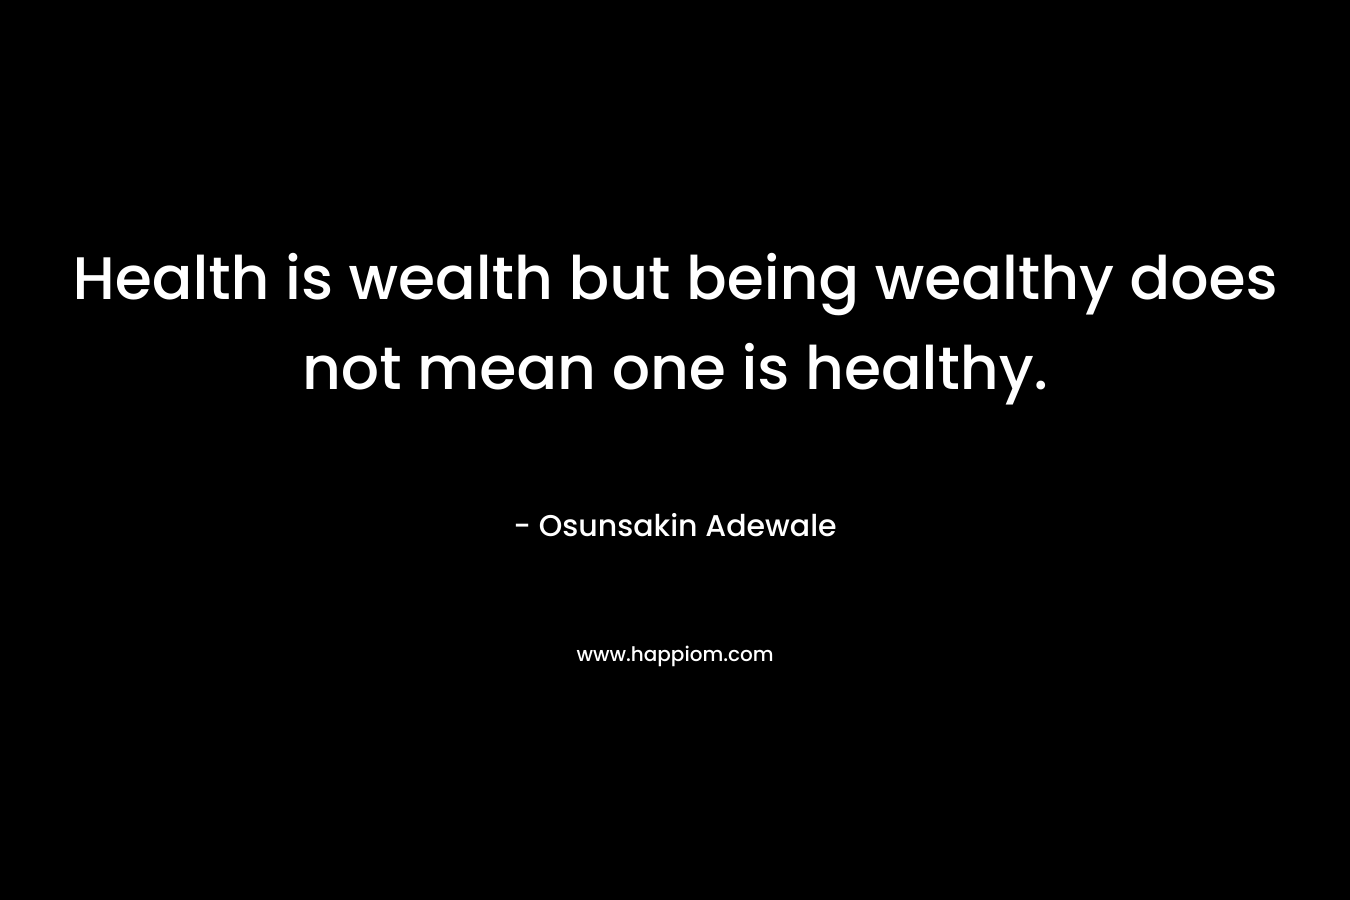 Health is wealth but being wealthy does not mean one is healthy.